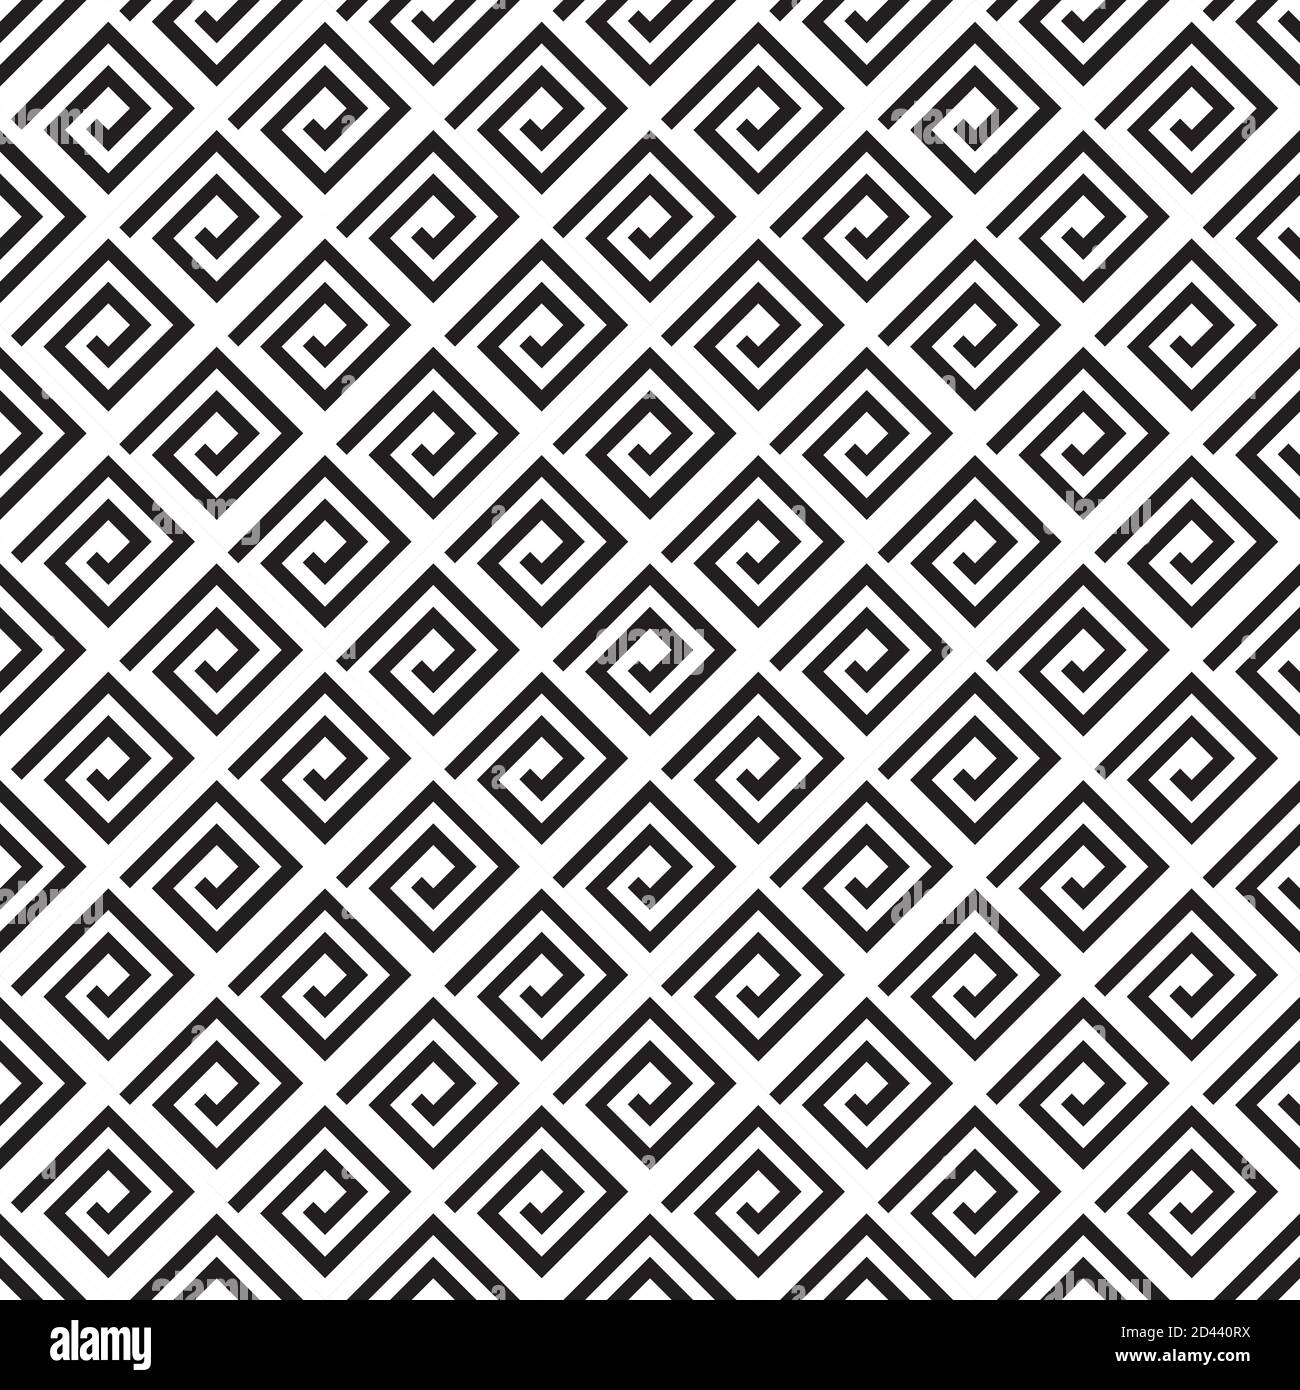 Seamless pattern with geometric forms Stock Vector